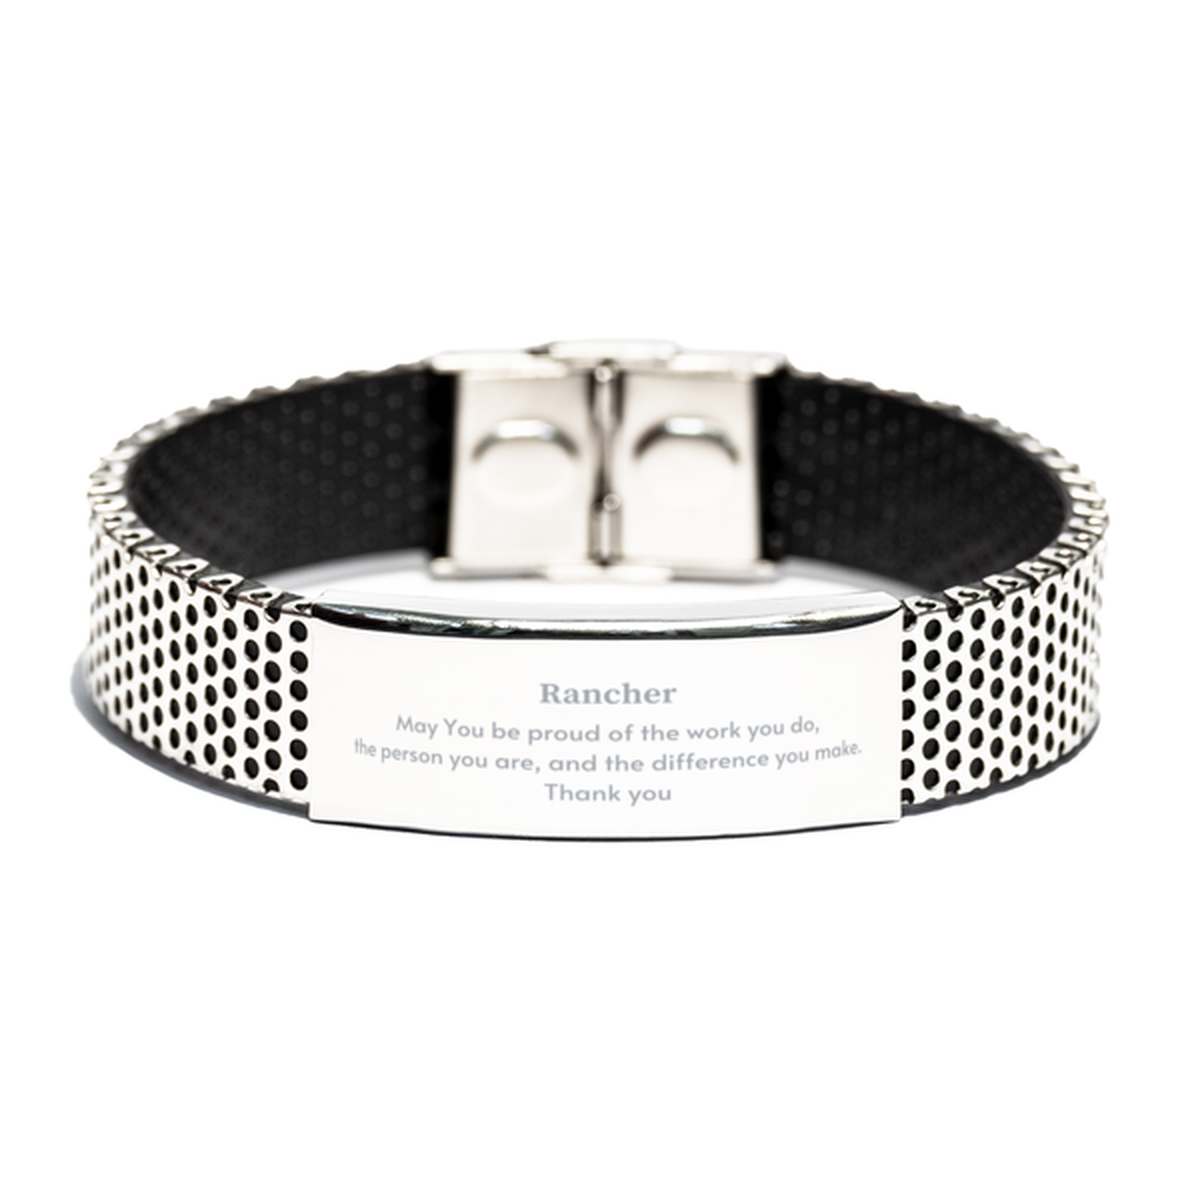 Heartwarming Stainless Steel Bracelet Retirement Coworkers Gifts for Rancher, Rancher May You be proud of the work you do, the person you are Gifts for Boss Men Women Friends